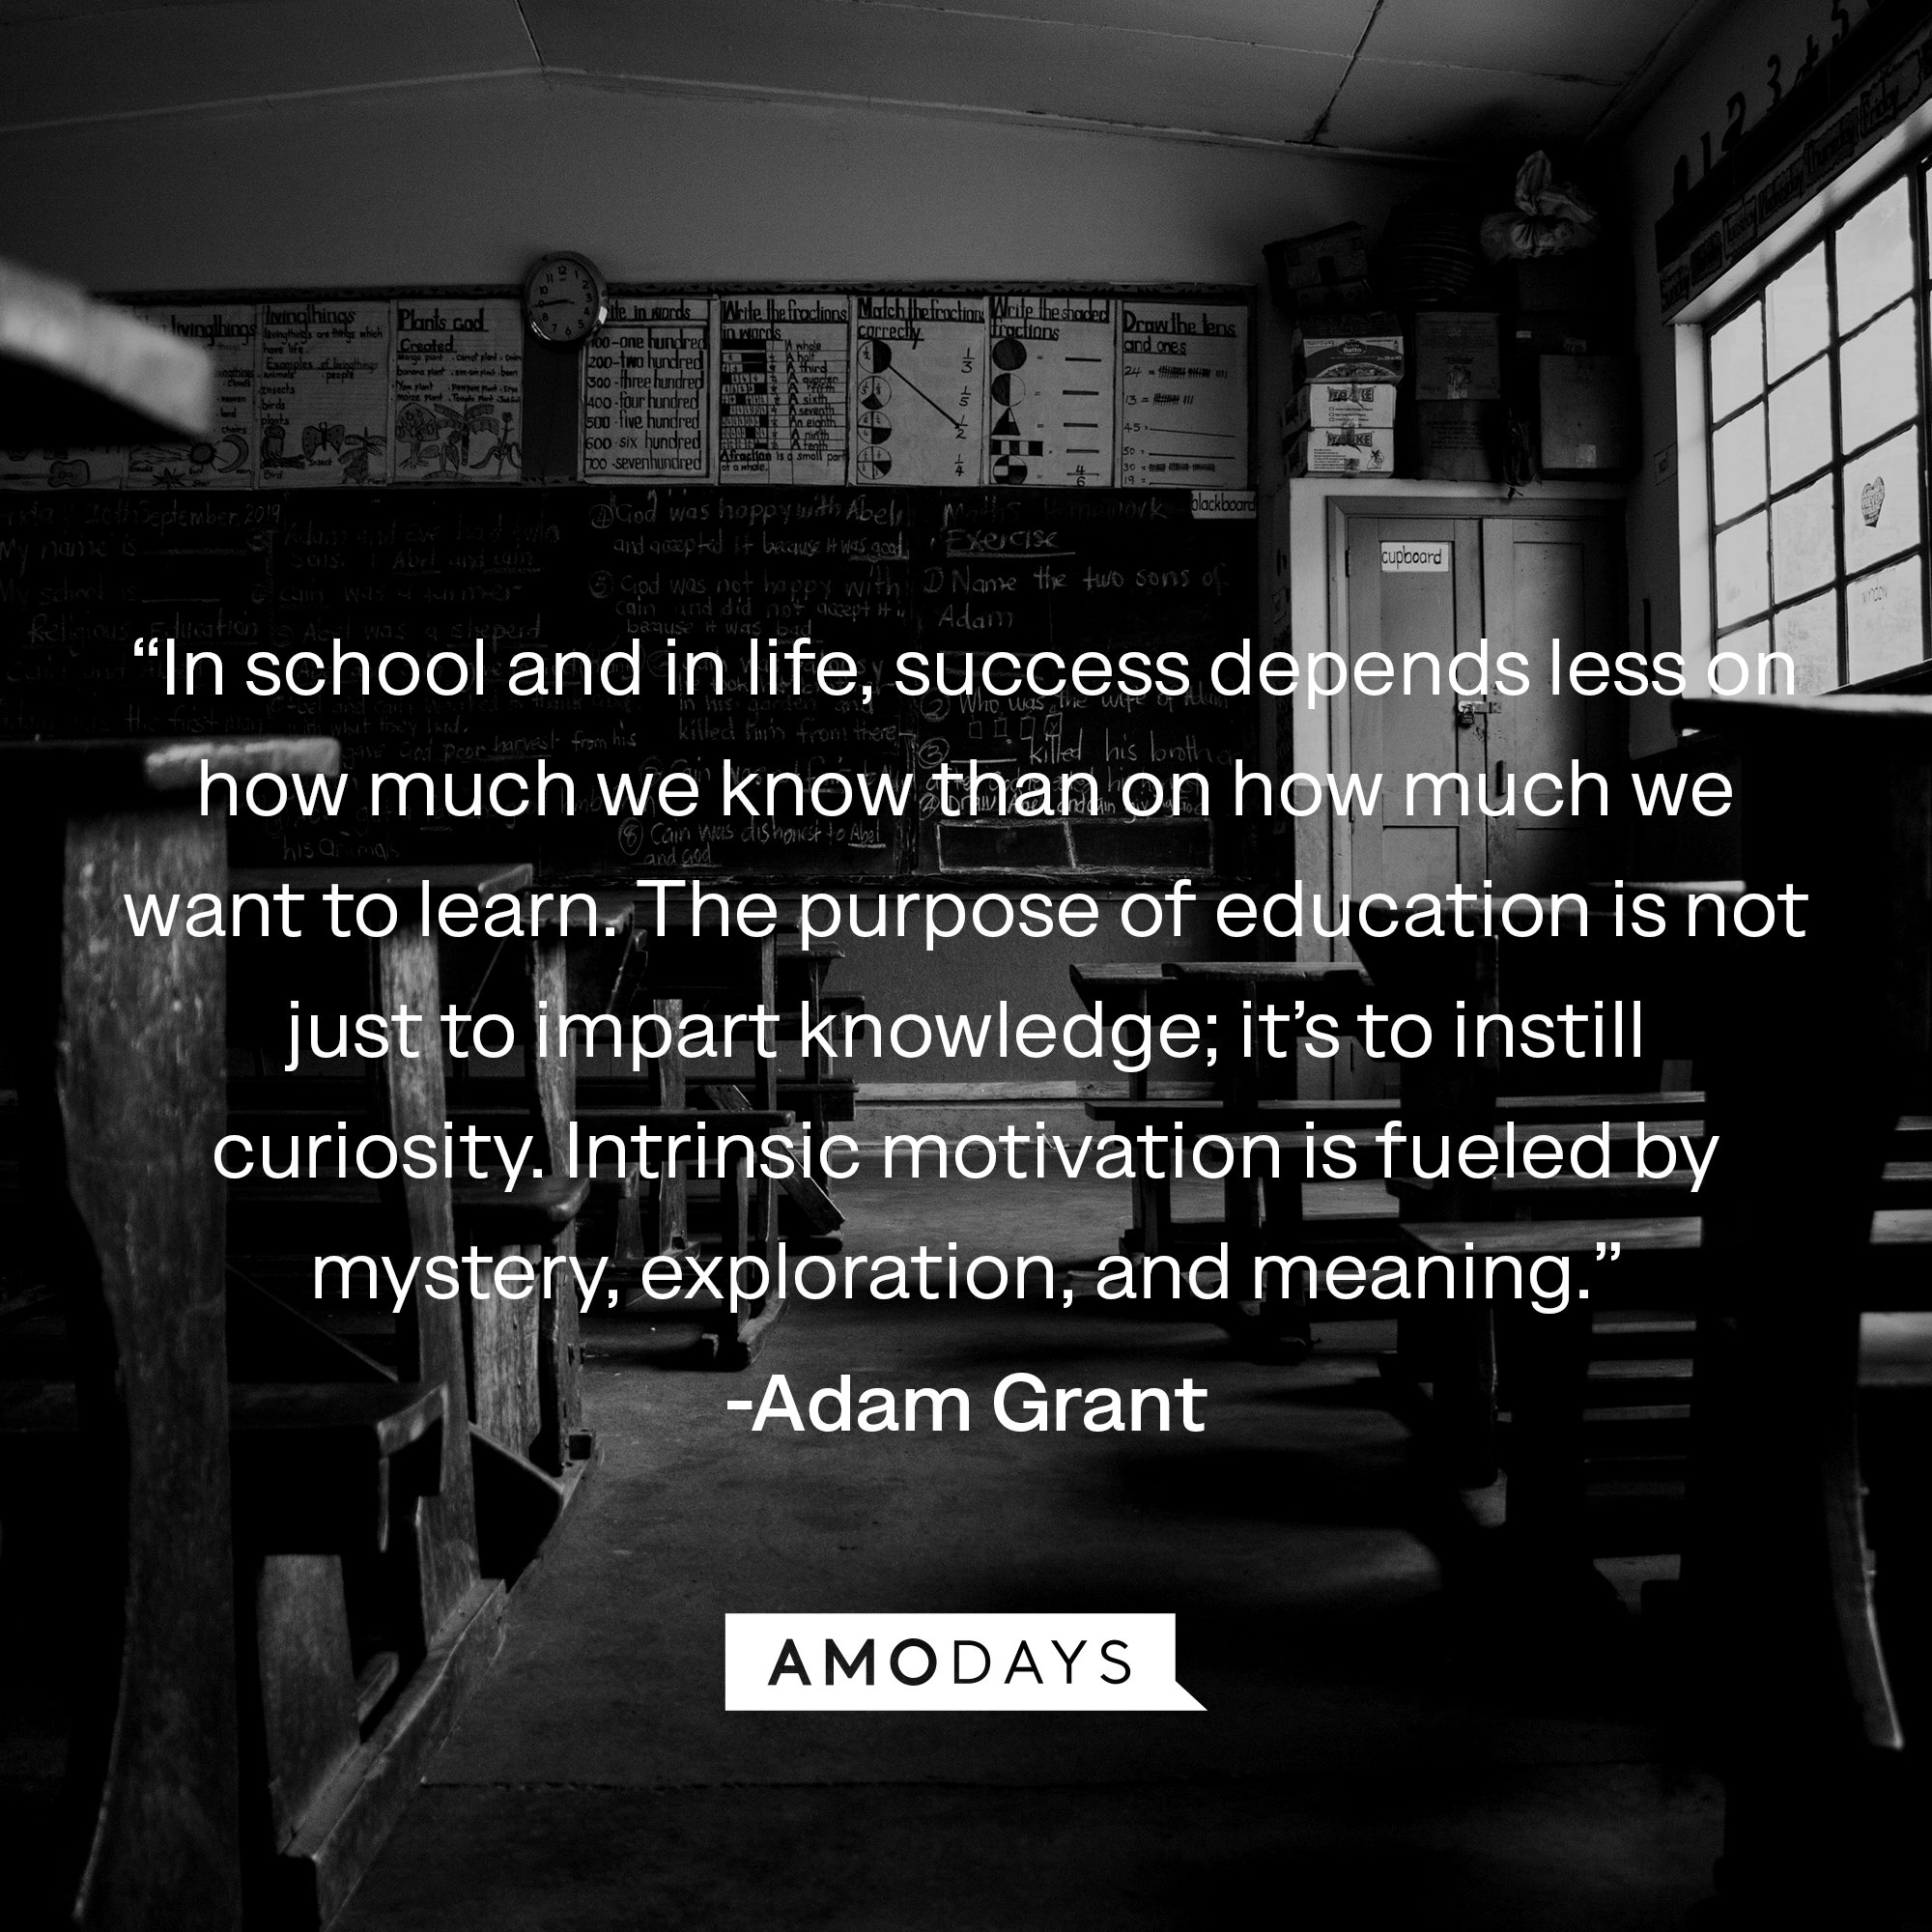  Adam Grant's quote: “In school and in life, success depends less on how much we know than on how much we want to learn. The purpose of education is not just to impart knowledge; it’s to instill curiosity. Intrinsic motivation is fueled by mystery, exploration, and meaning.”| Image: AmoDays